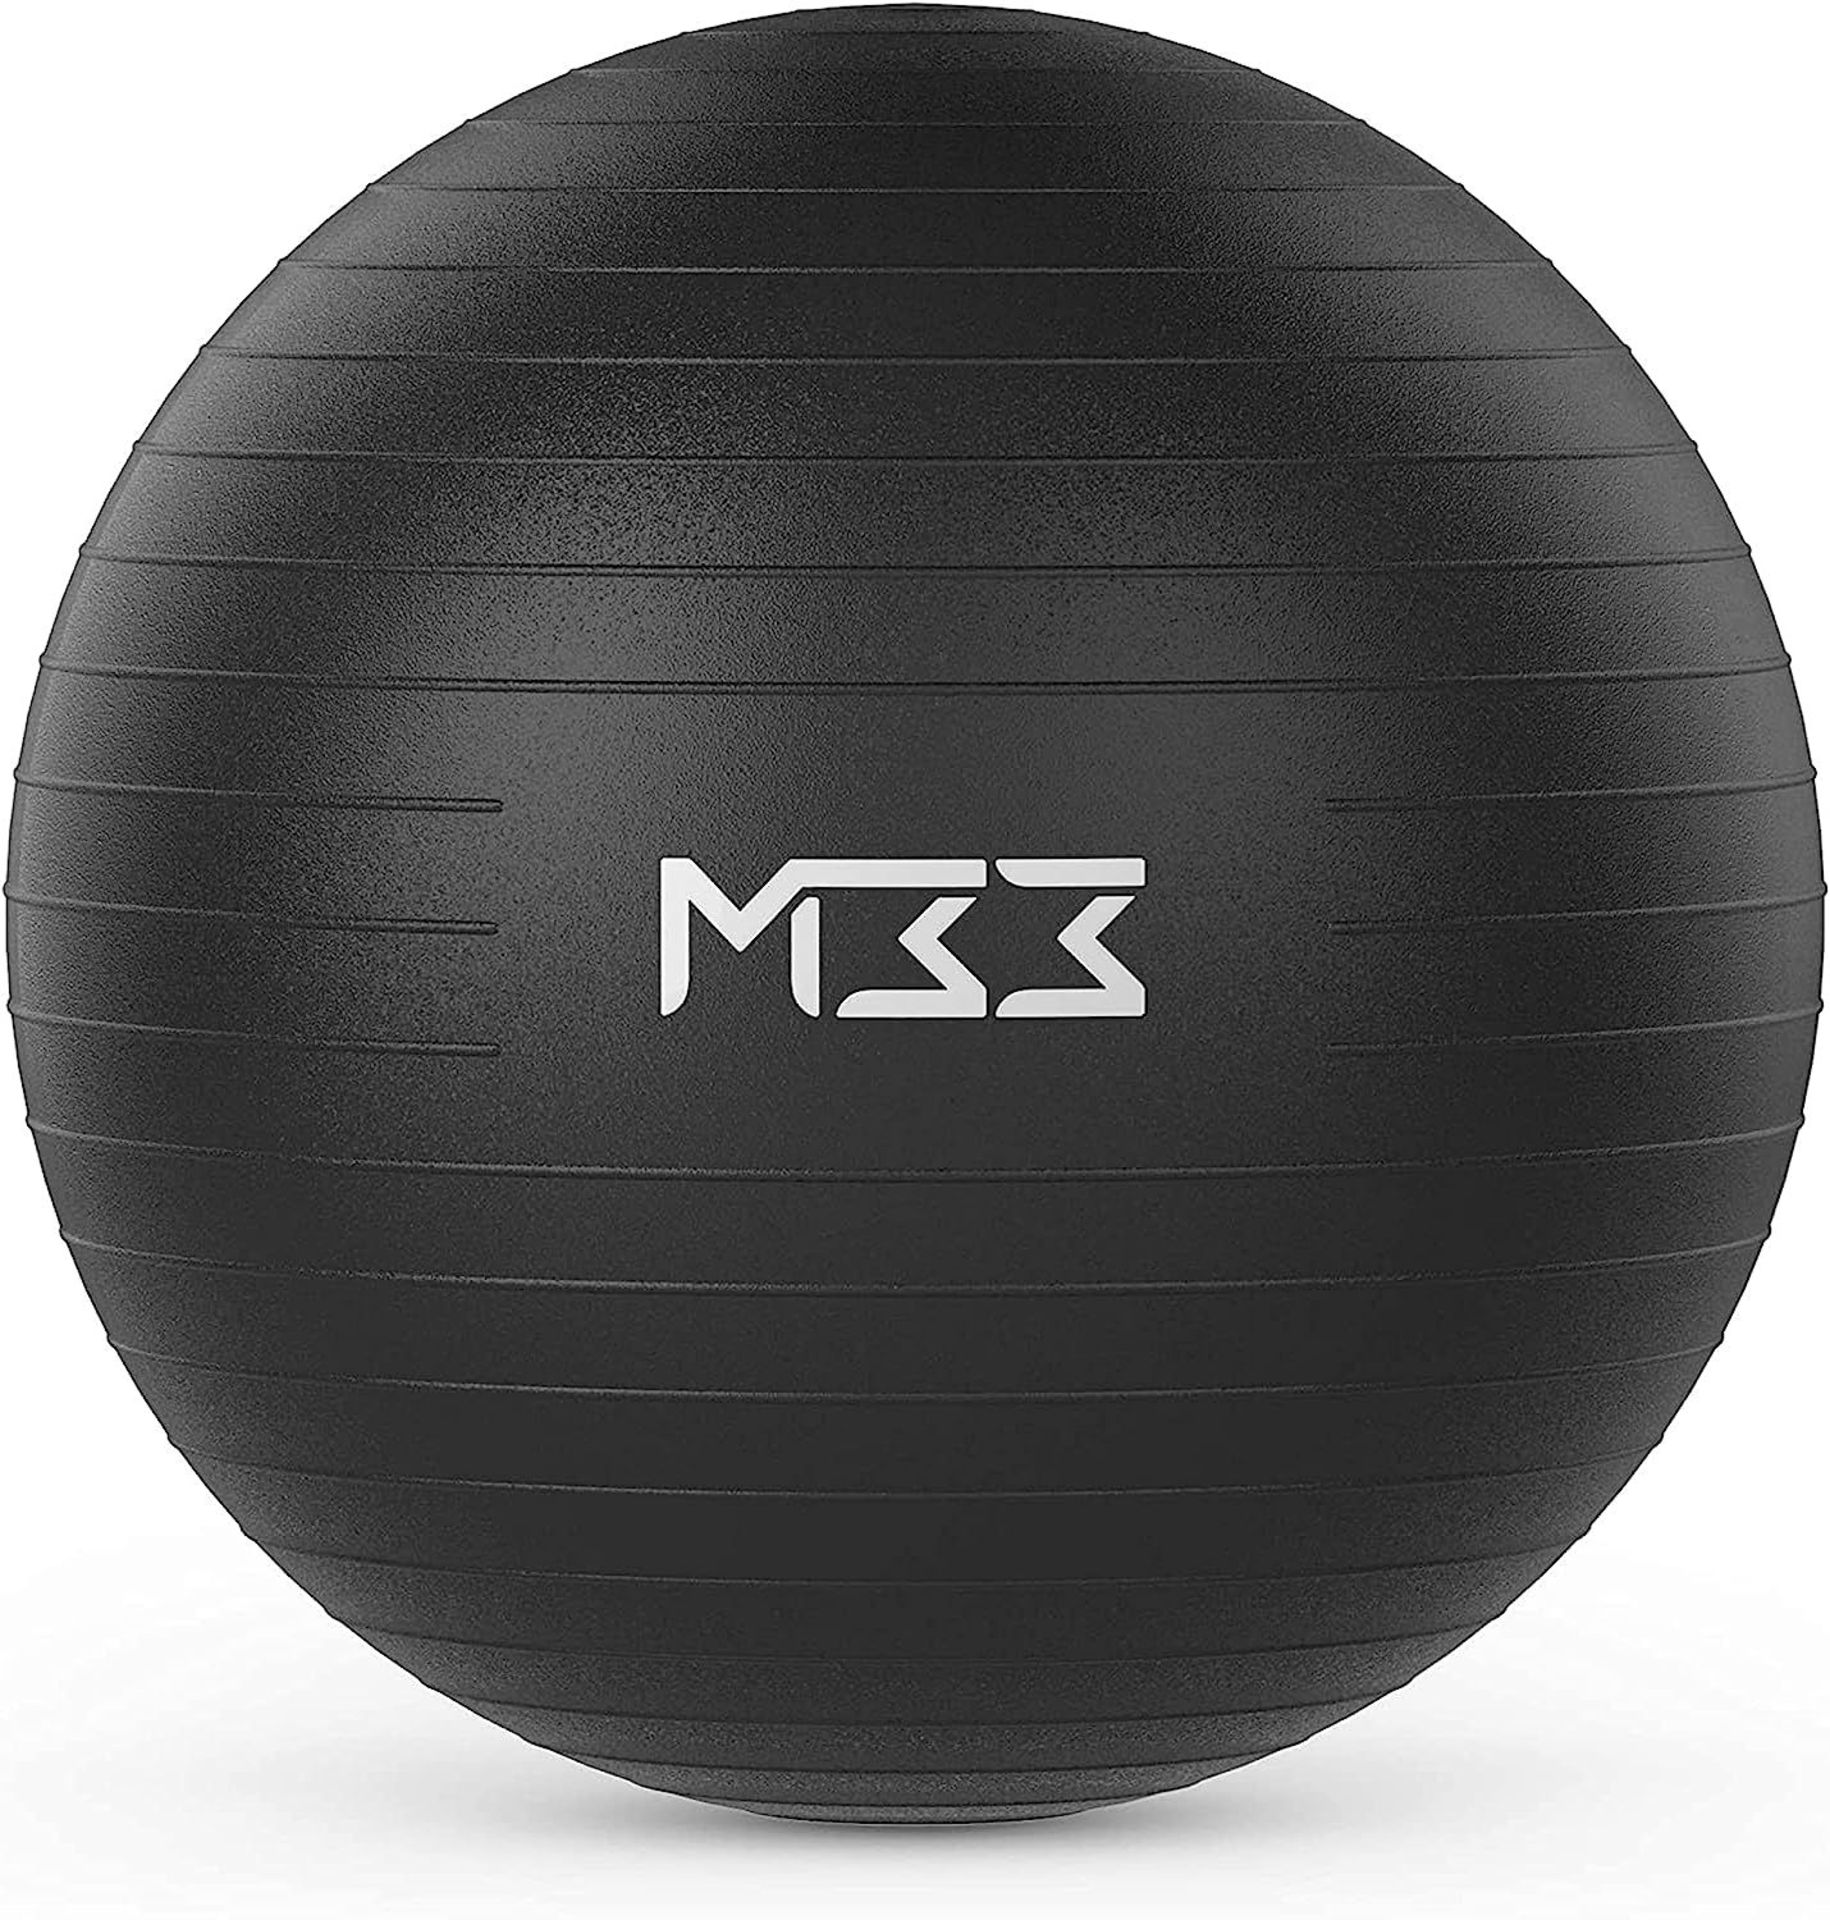 10 x Mode33 Exercise / Yoga / Pregnancy Ball - 55cm (NEW) - RRP Â£169.90 ! - Image 8 of 11